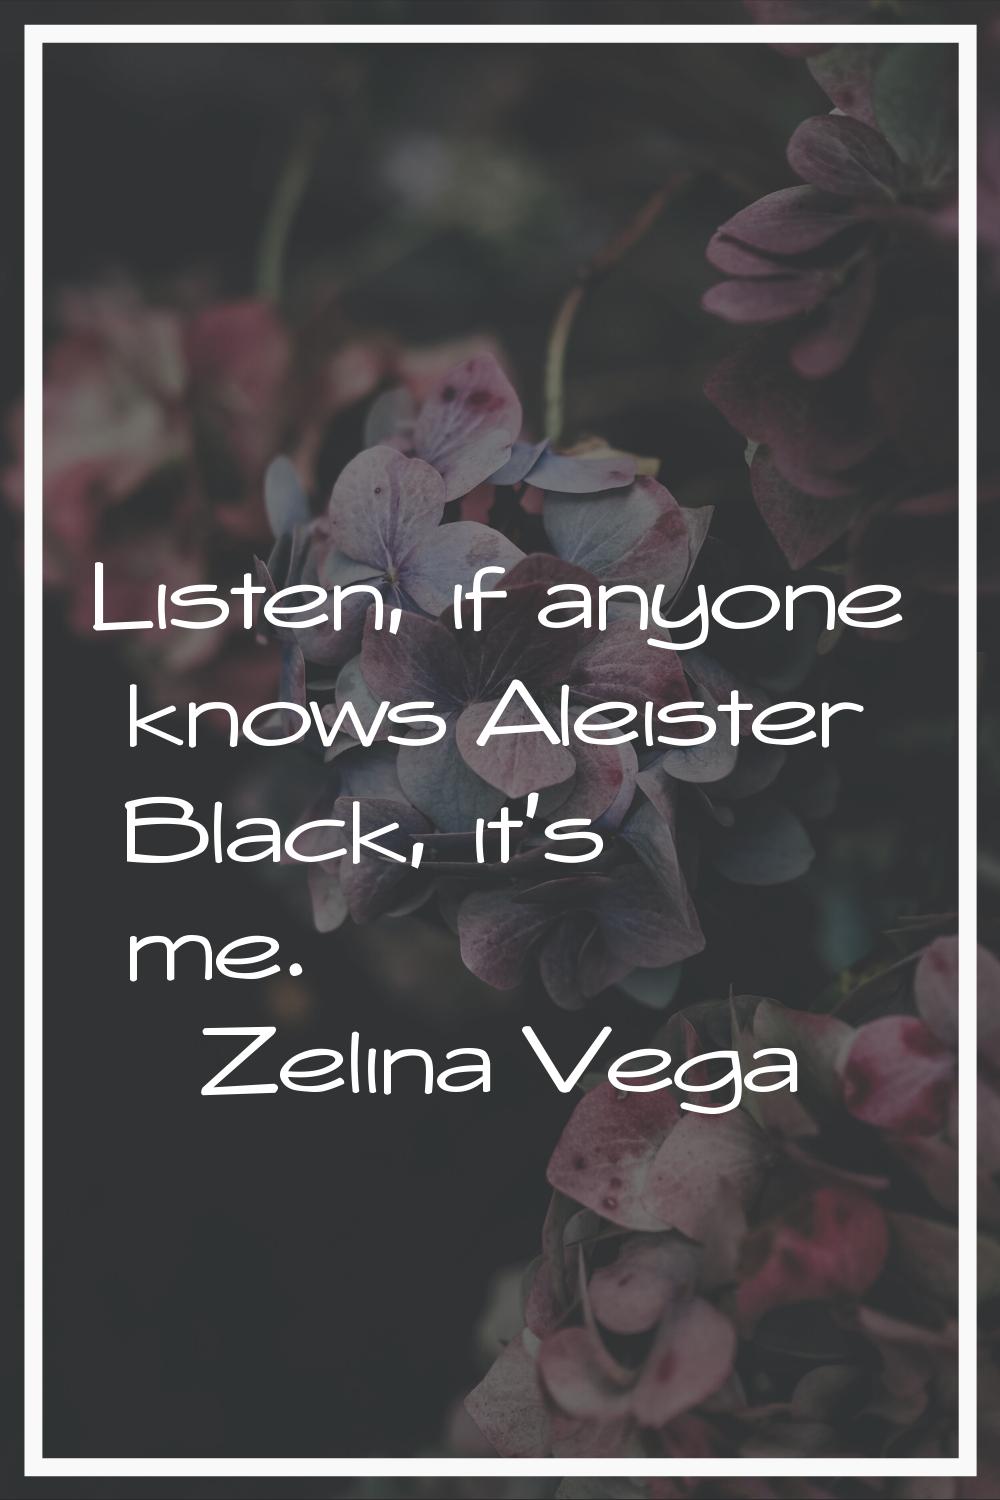 Listen, if anyone knows Aleister Black, it's me.